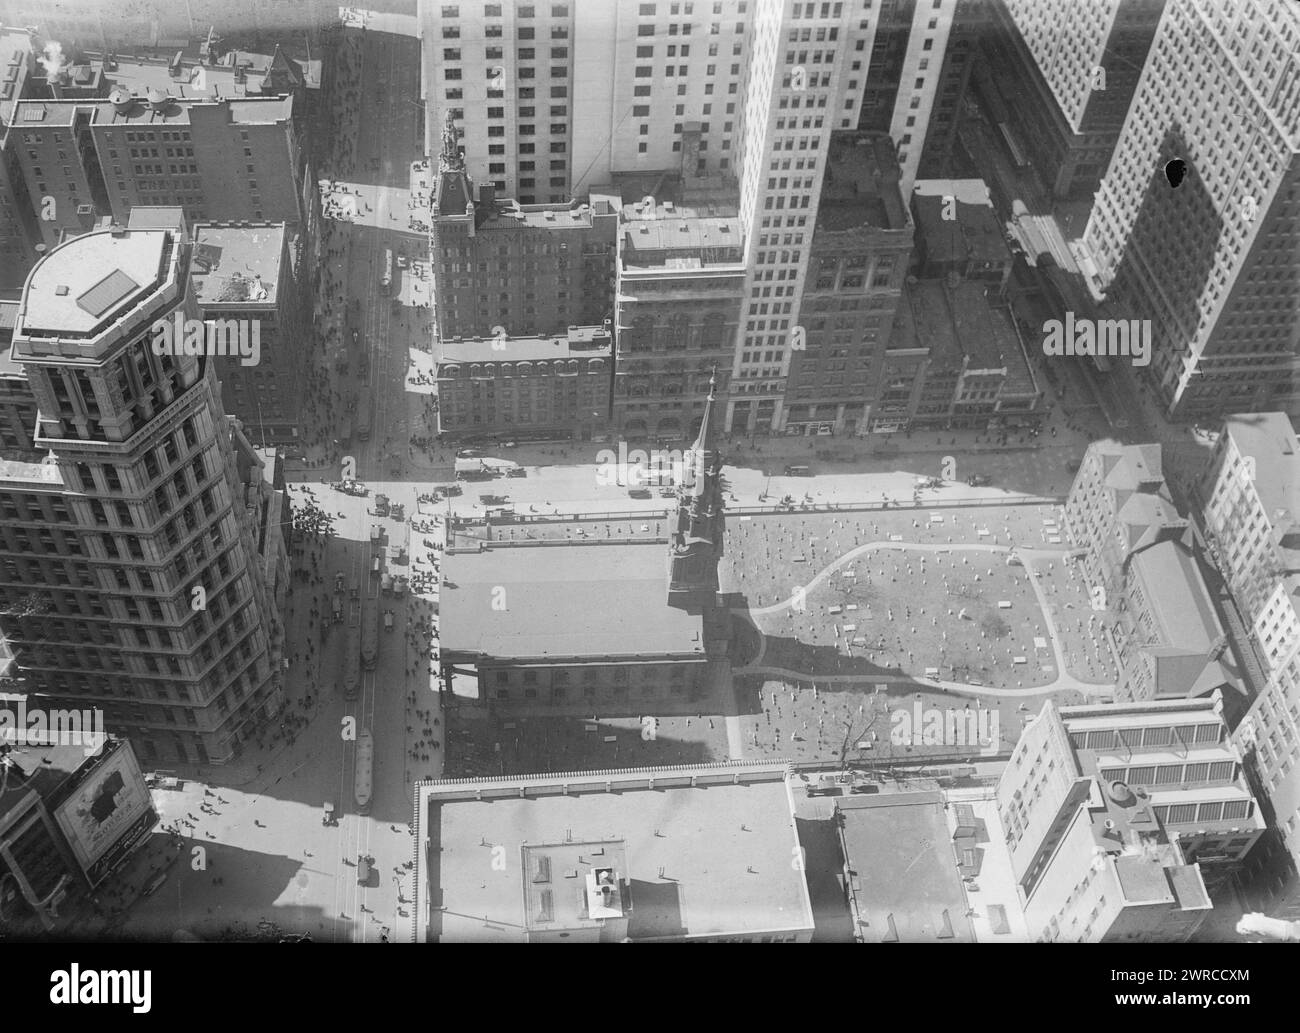 From Woolworth Bldg., Photograph shows an aerial view from the Woolworth Building of St. Paul's Chapel in lower Manhattan, New York City., between ca. 1915 and ca. 1920, Glass negatives, 1 negative: glass Stock Photo